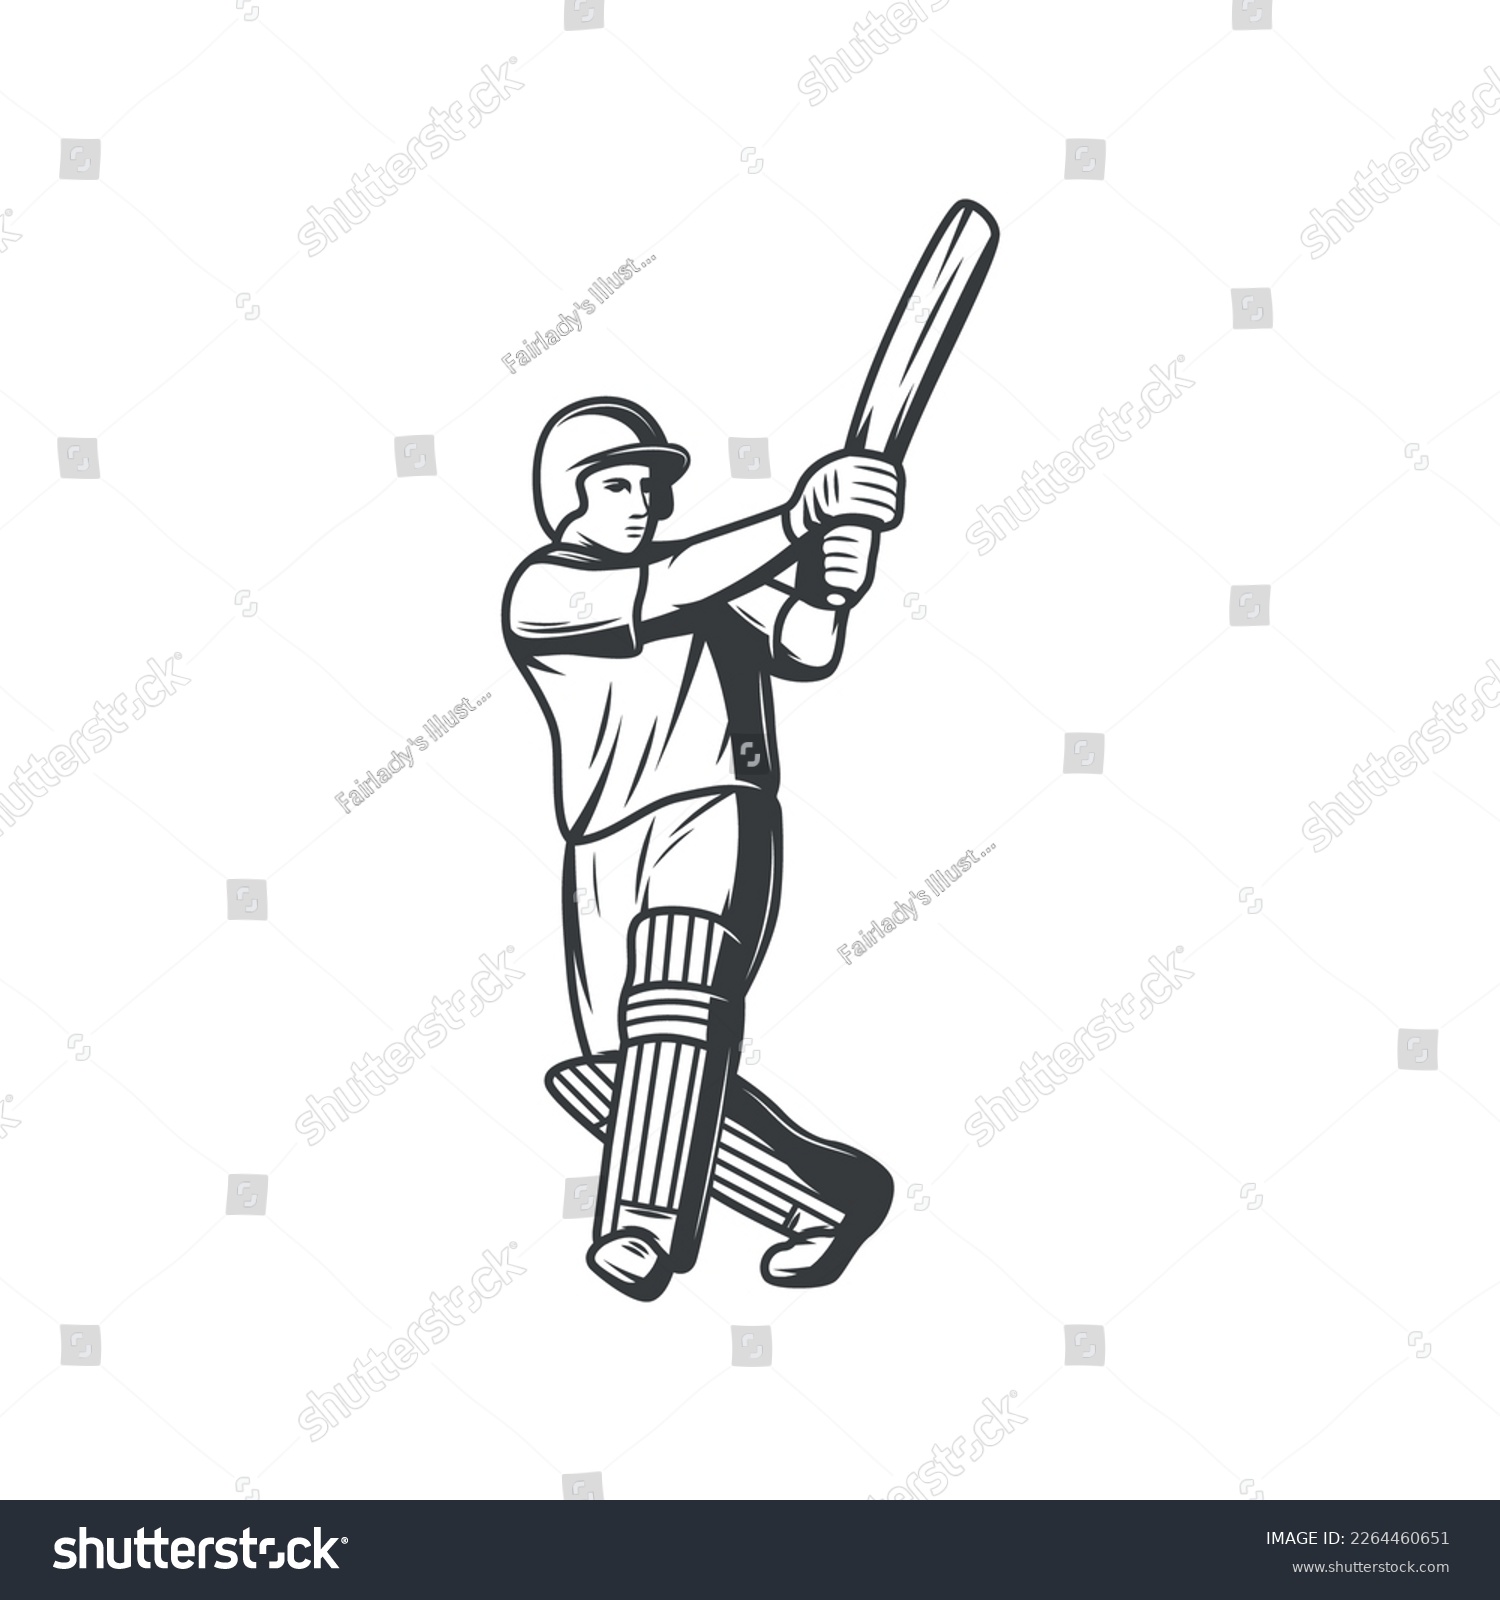 SVG of vector cricket batsmen icon template design isolated in white background svg